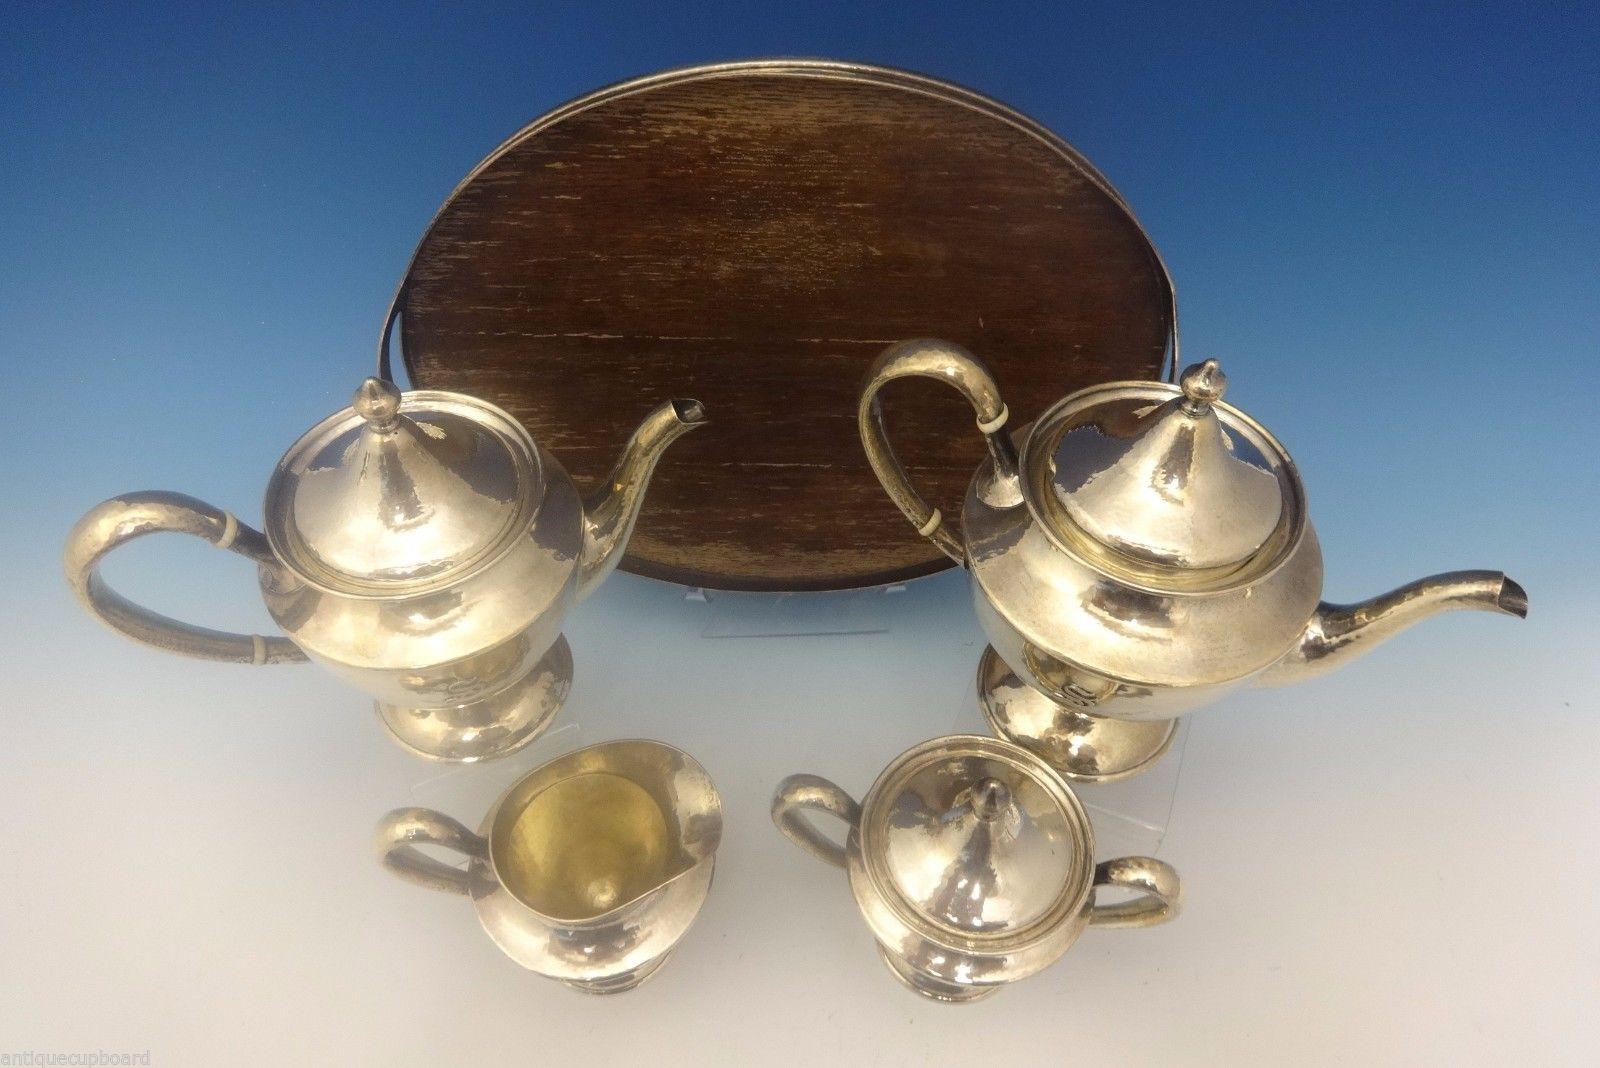 Antique Hammered by Shreve
Arts & Crafts Antique Hammered by Shreve 5-piece sterling tea set. The set has an applied S monogram and is marked with #3752. The set dates from circa 1915. It includes: Coffee pot: Holds 2 pints, and it measures 8 tall,